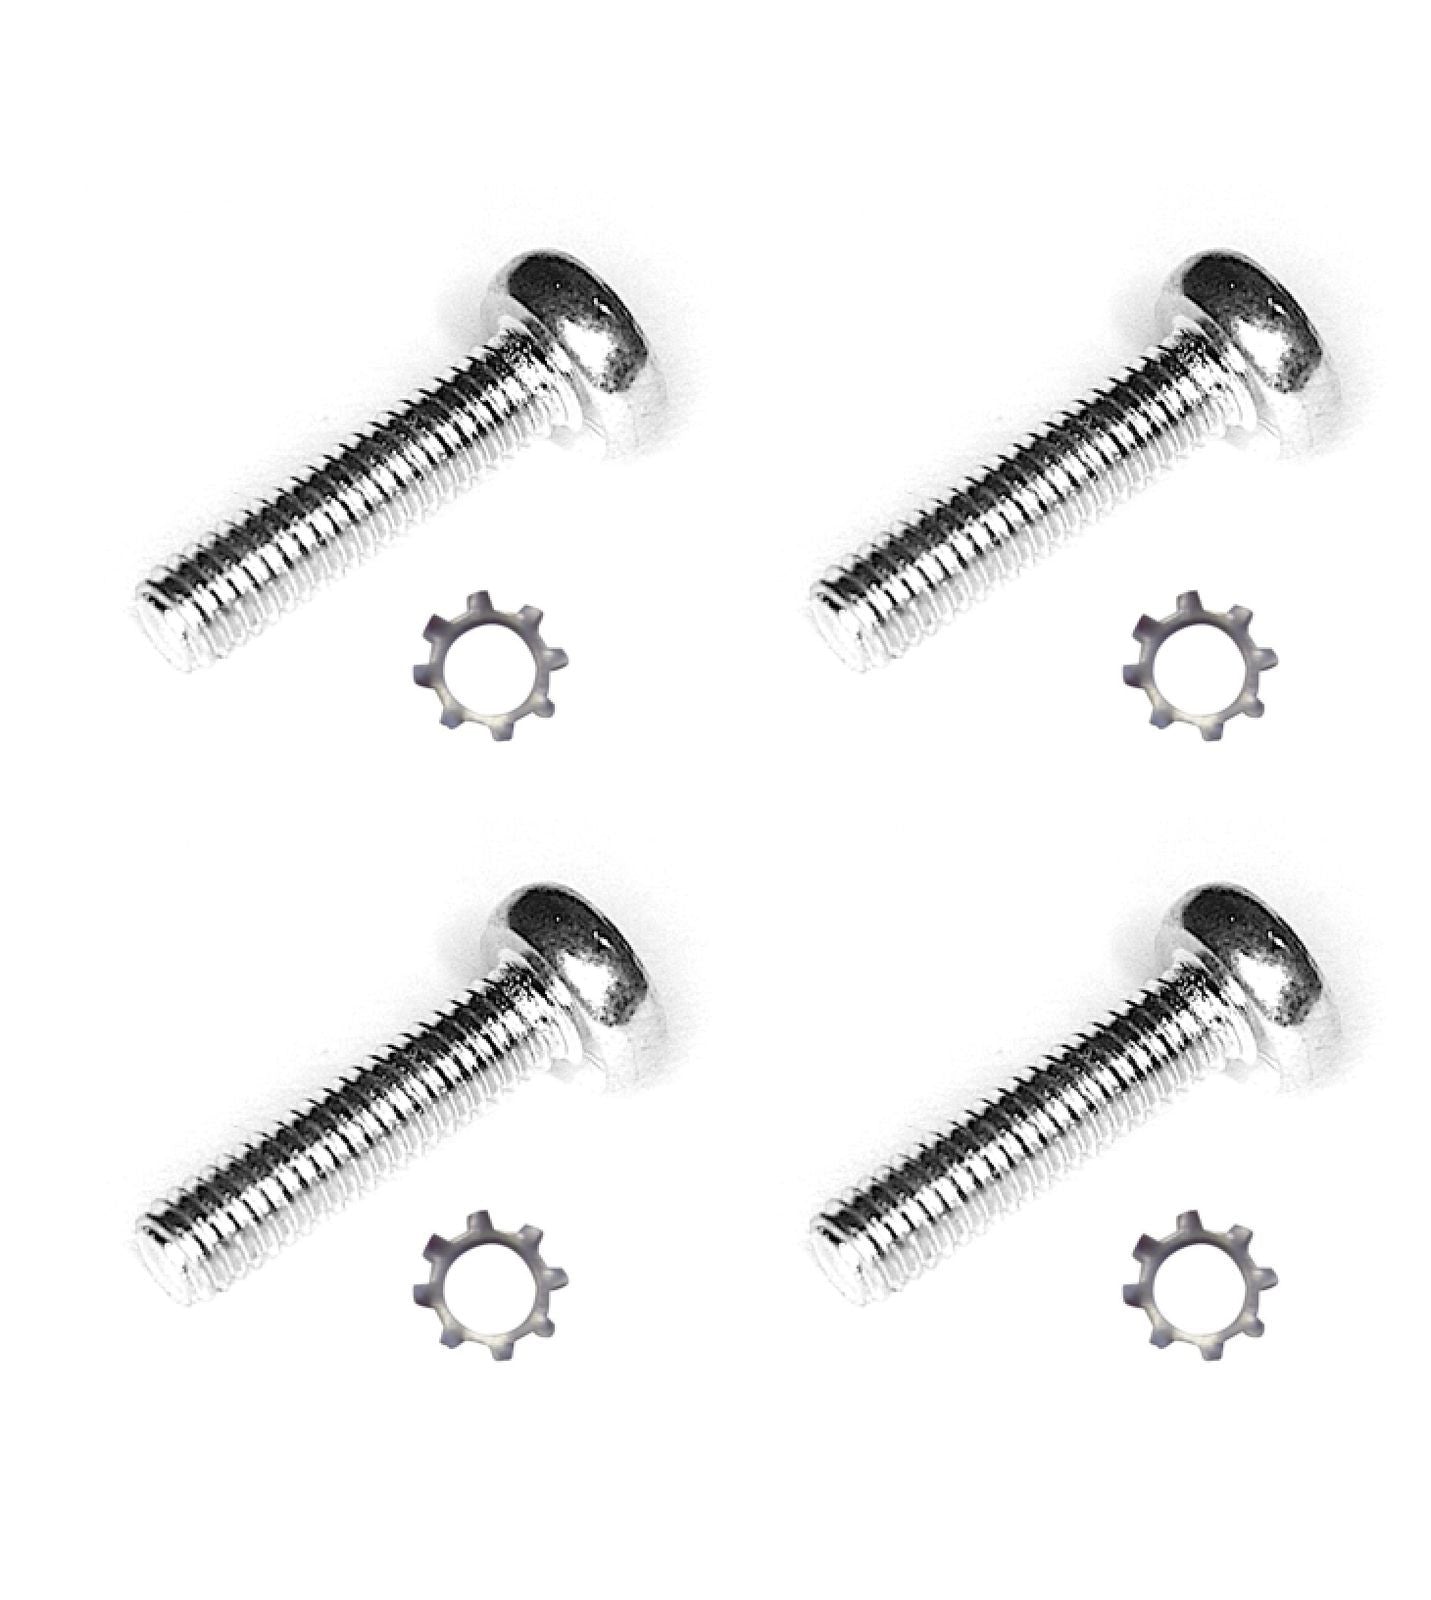 LG Screws for LCD TV Stand, Base, Bracket M4 x 15mm FAB30016124 - Spared Parts UK